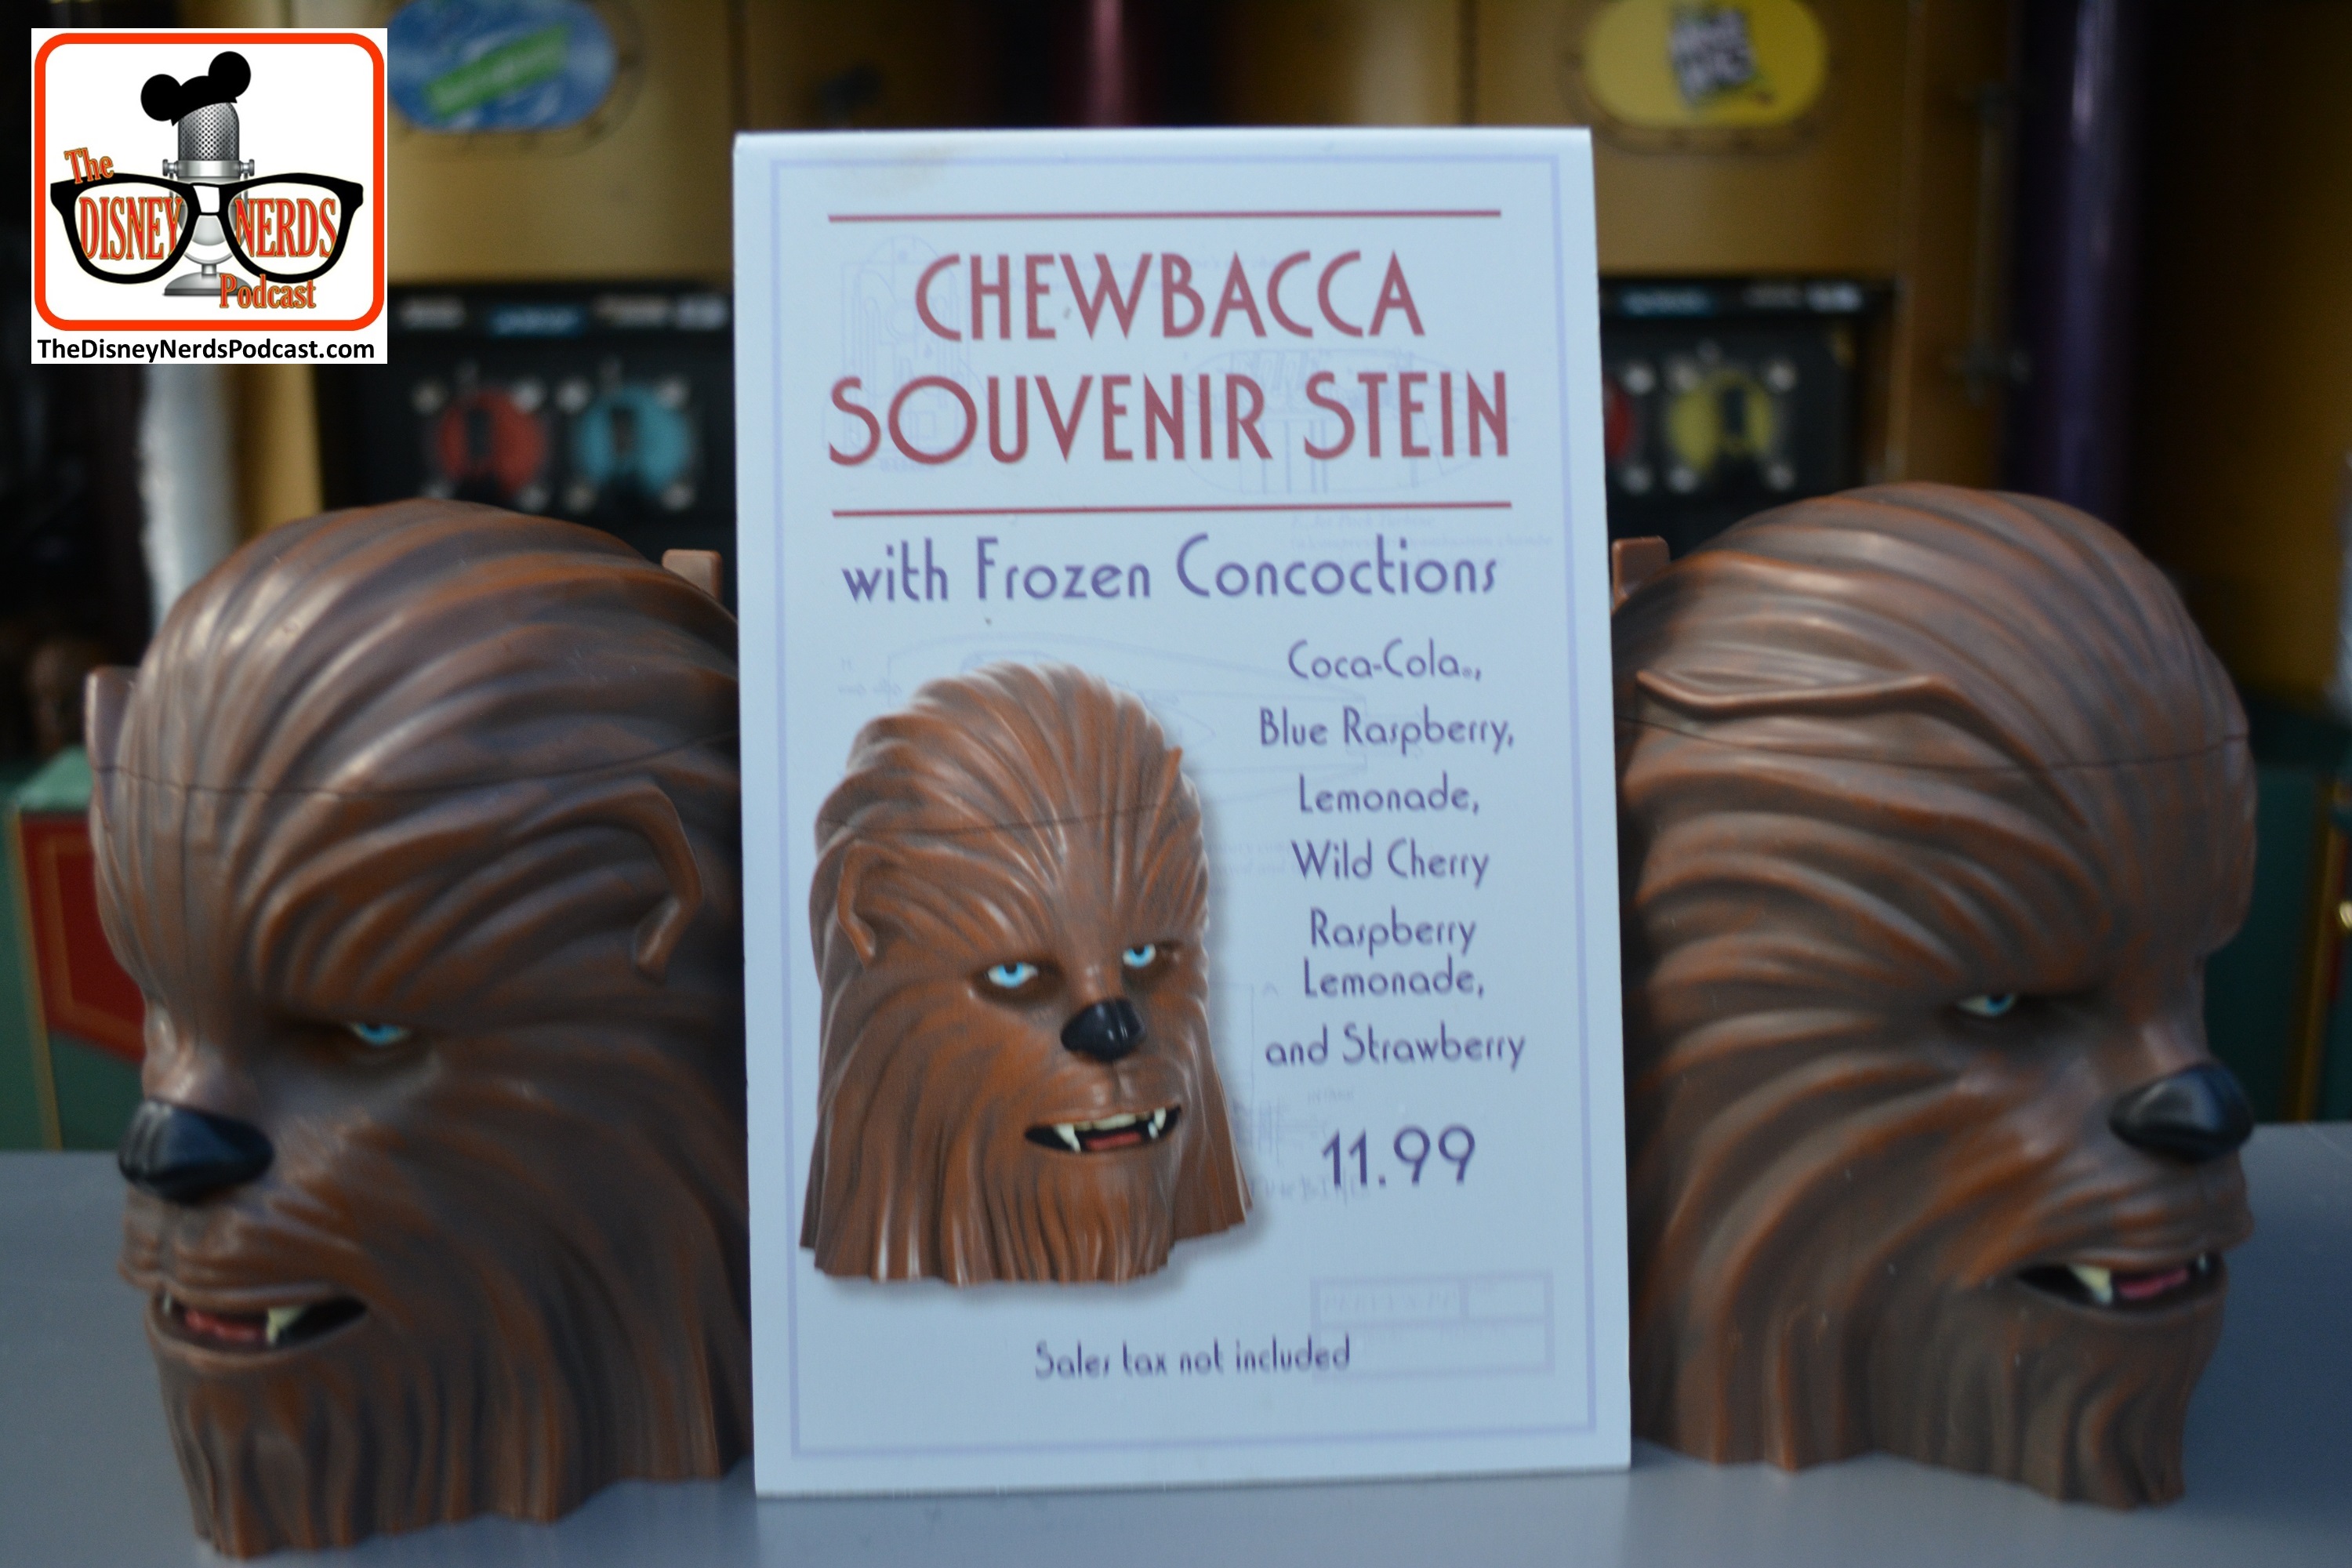 2015-12 - Hollywood Studios - Star Wars is just about everywhere in Hollywood studios.